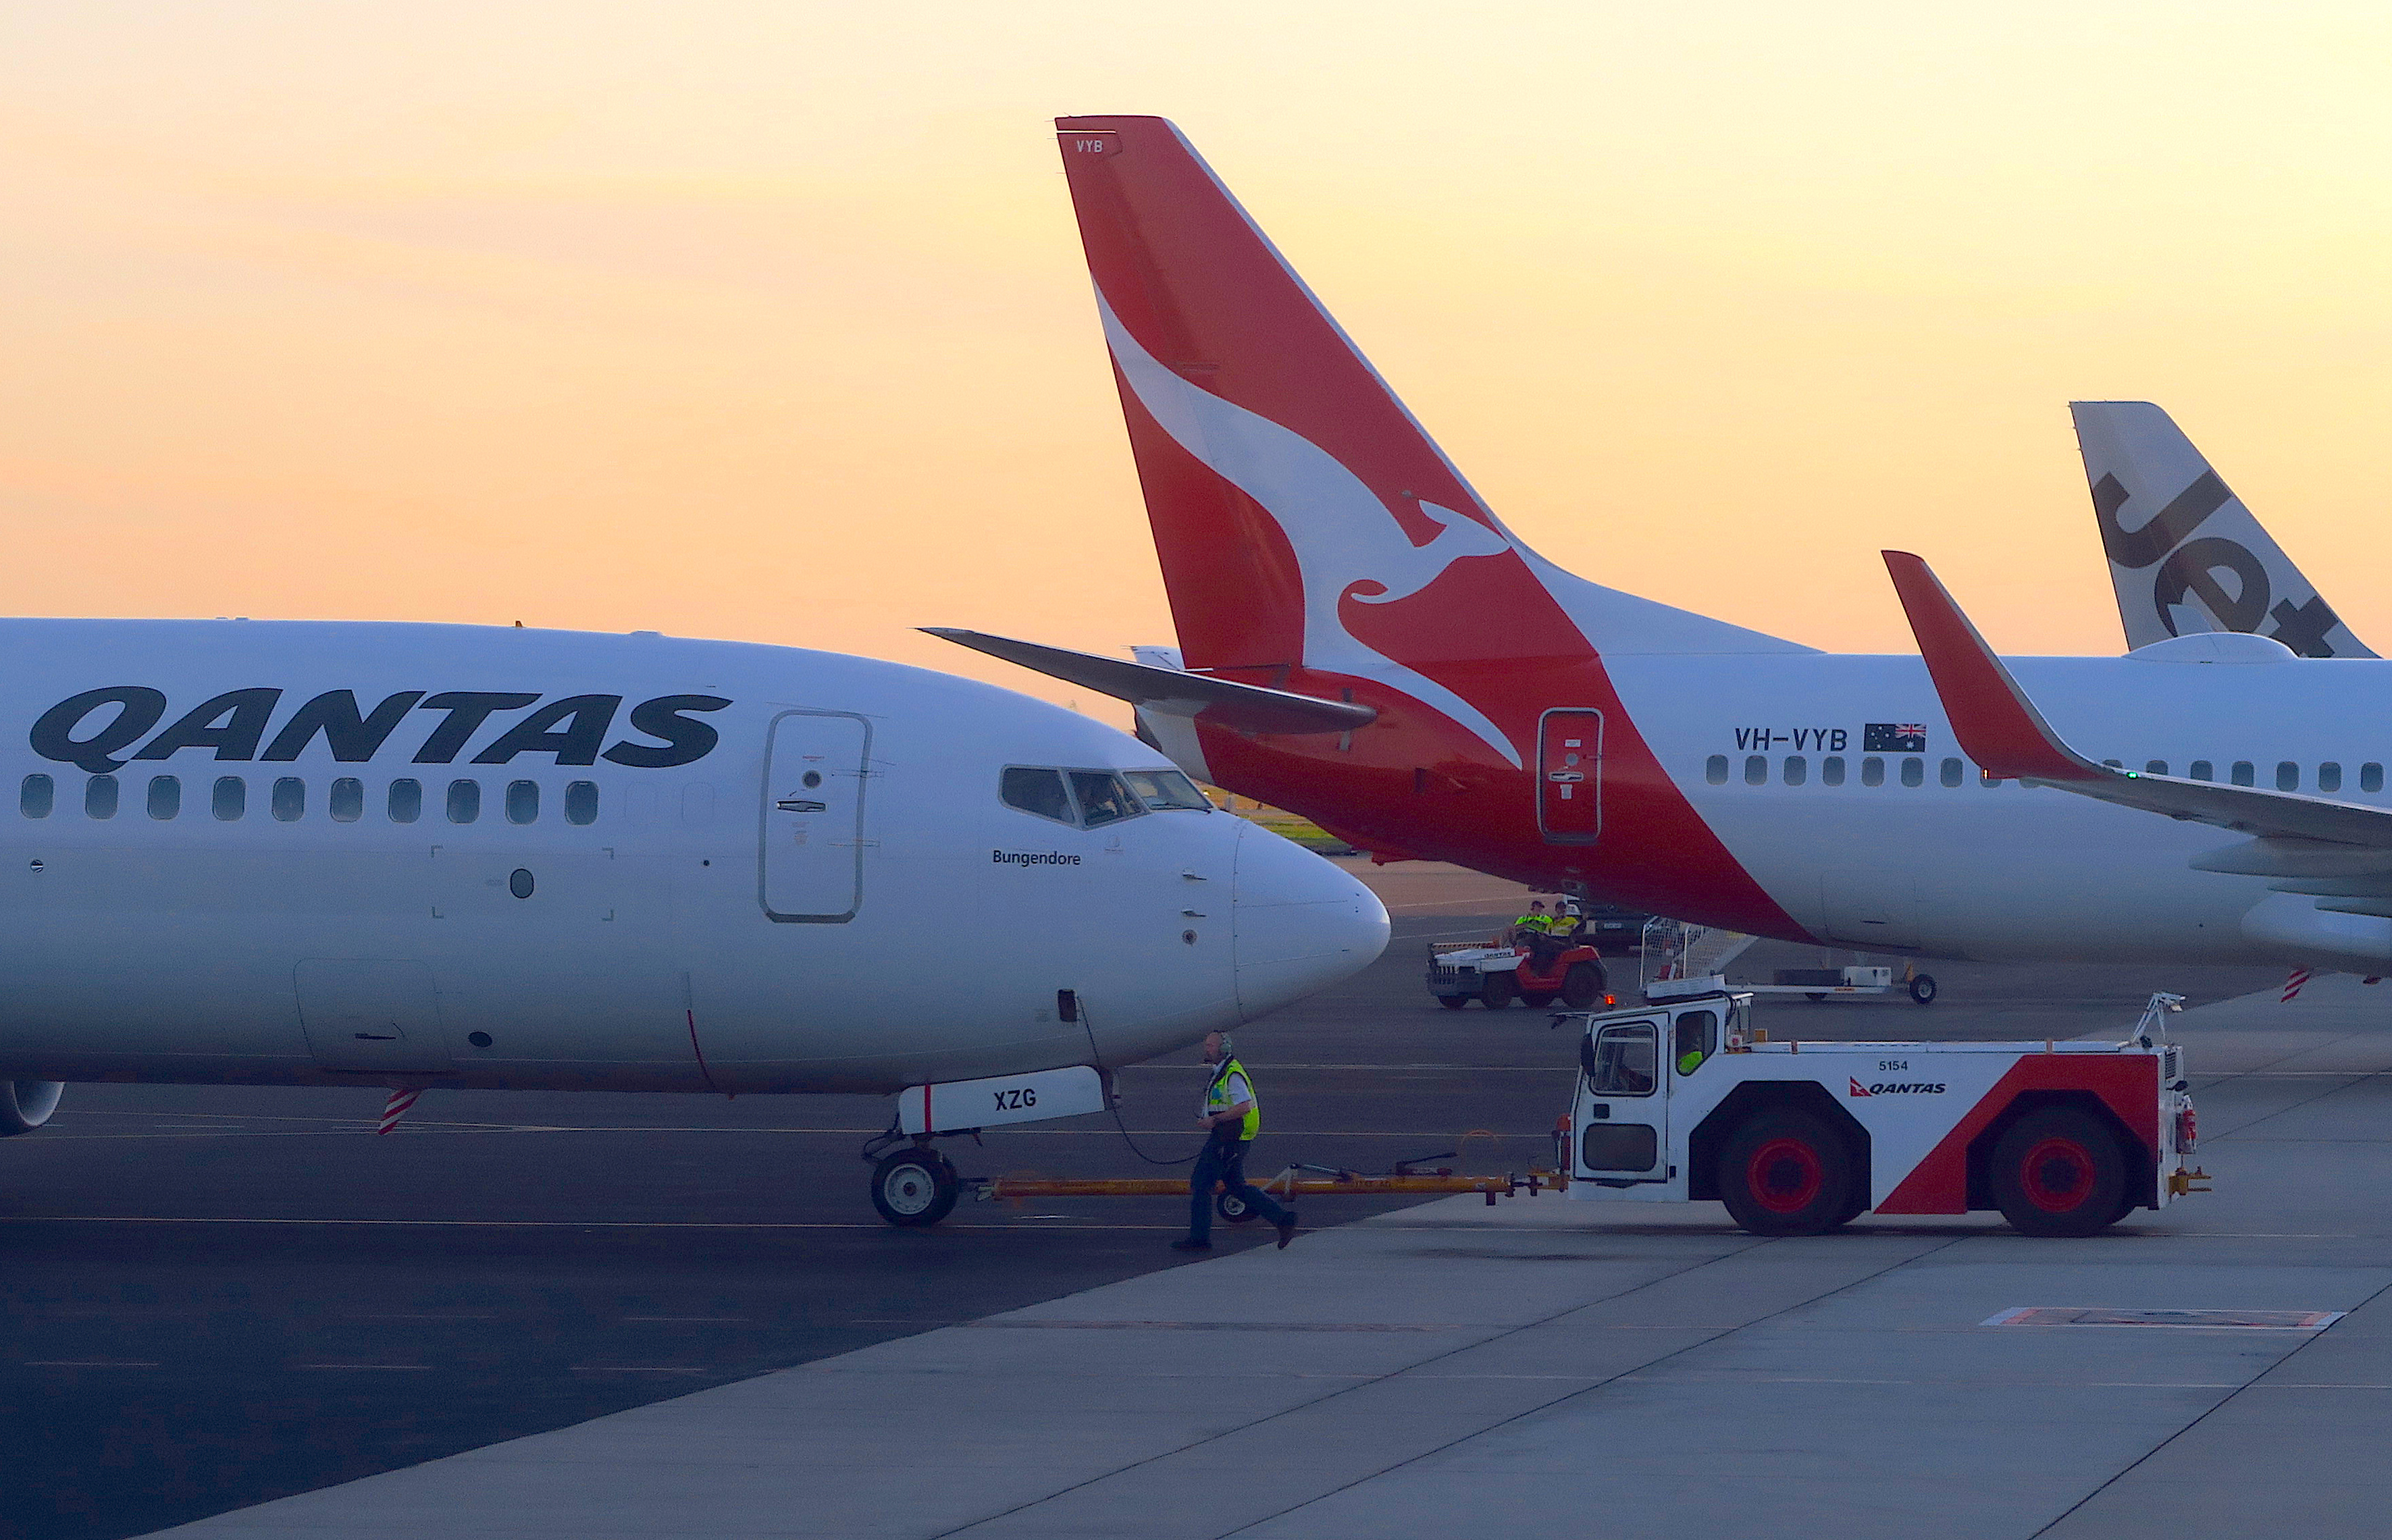 Workers are seen near Qantas Airways, Australia's national carrier, Boeing 737-800 aircraft on the tarmac at Adelaide Airport